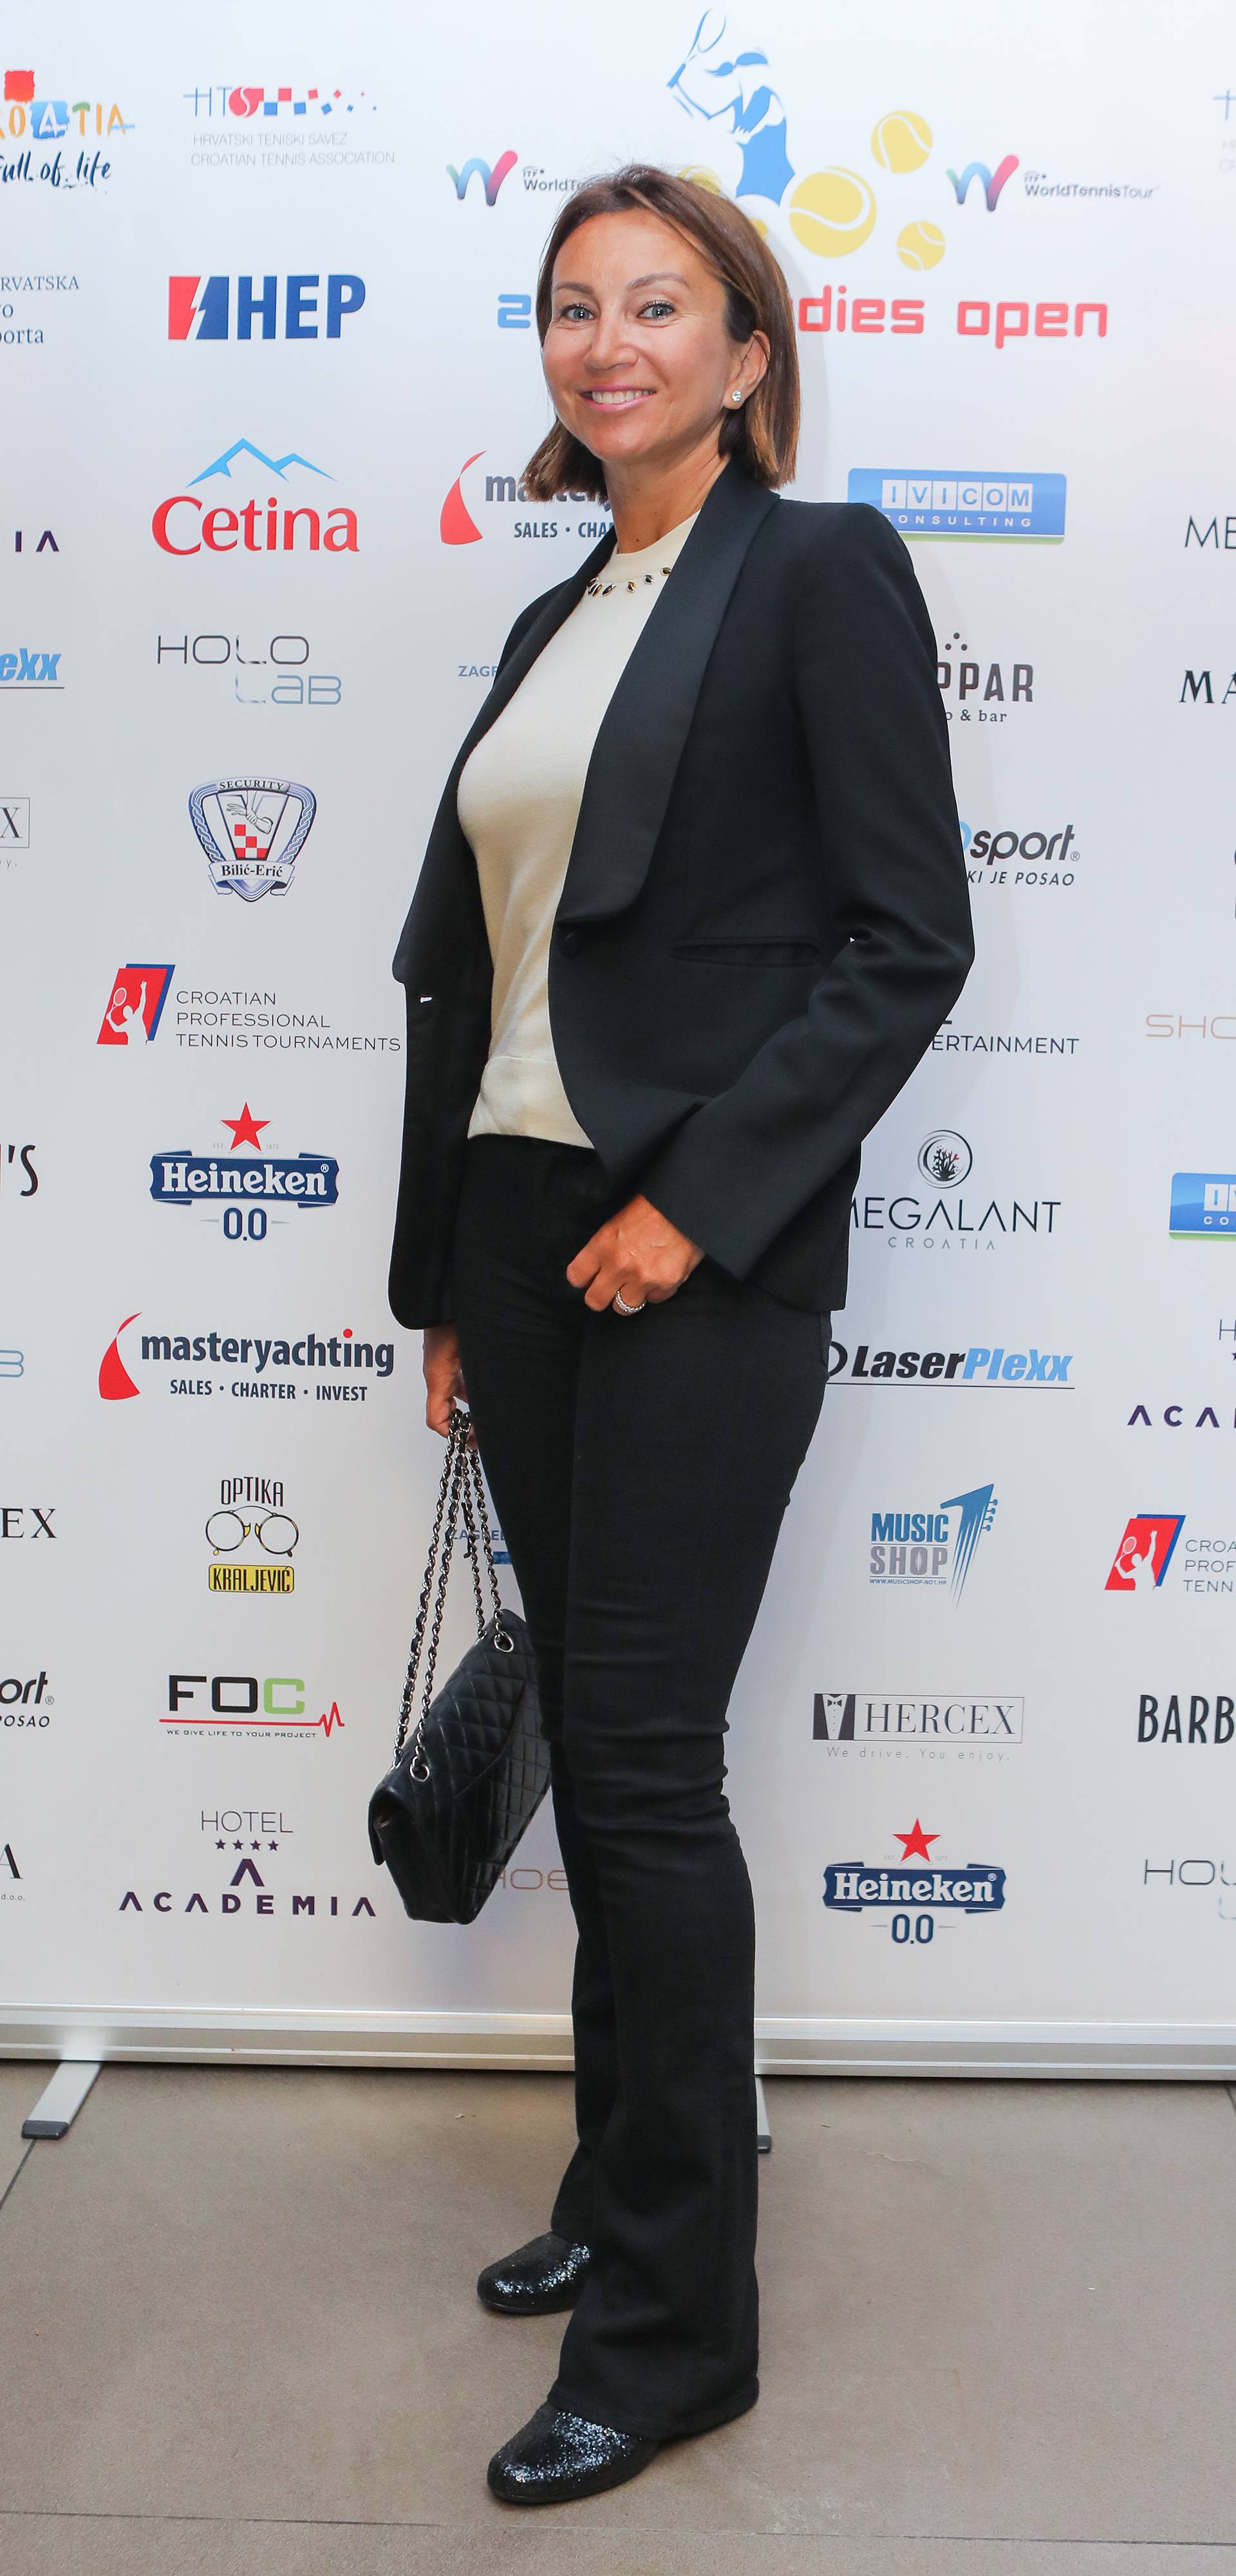 Zagreb Ladies' Open Player's Party 